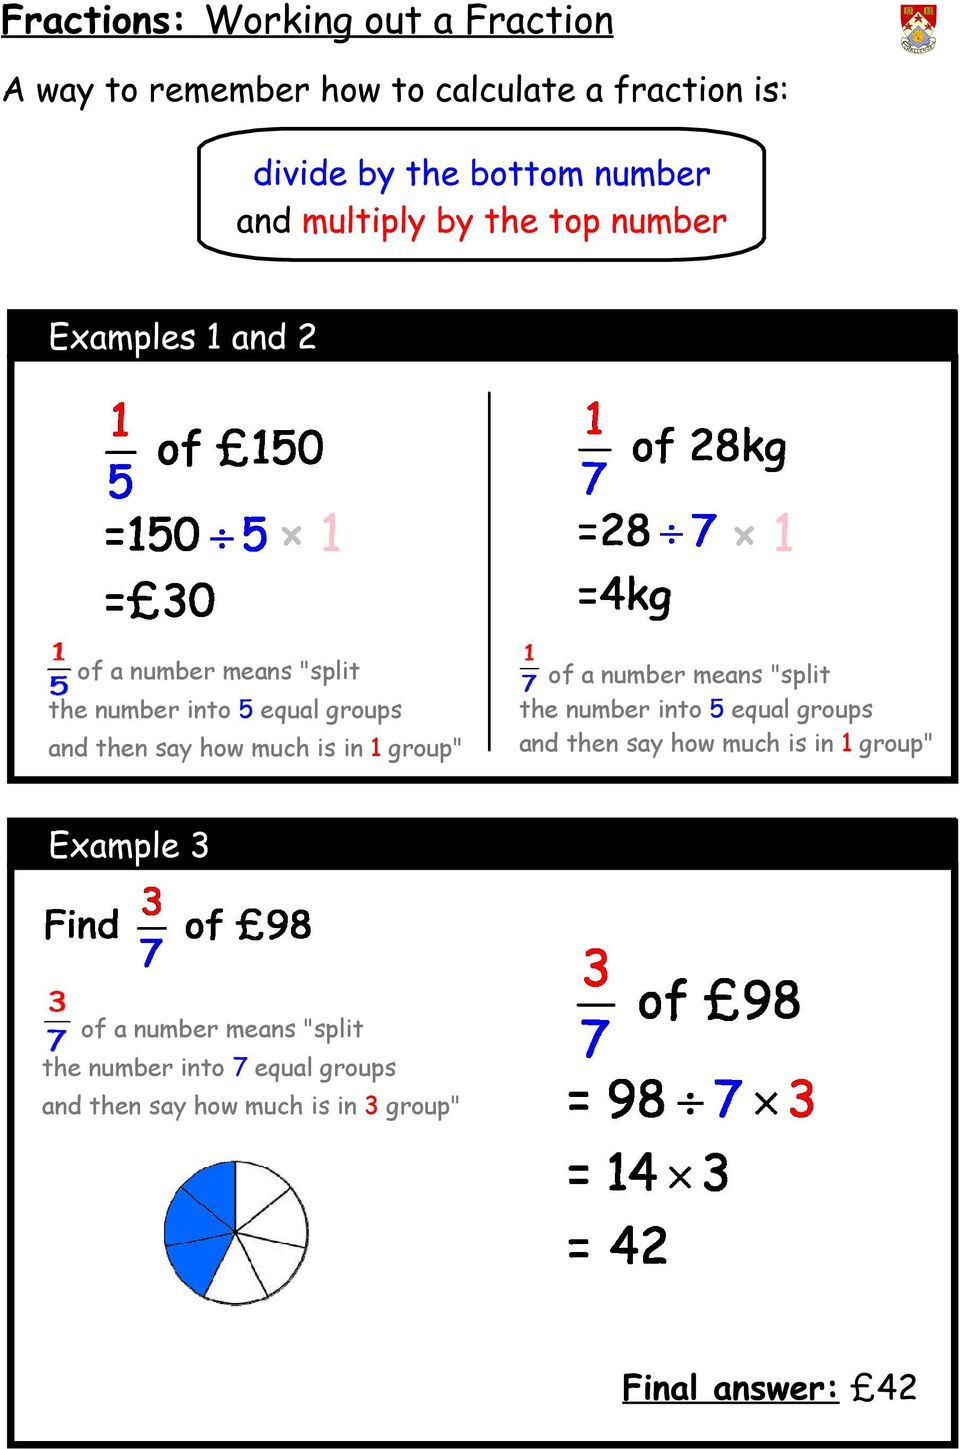 "split the number into 7 equal groups and then say how much is in 3